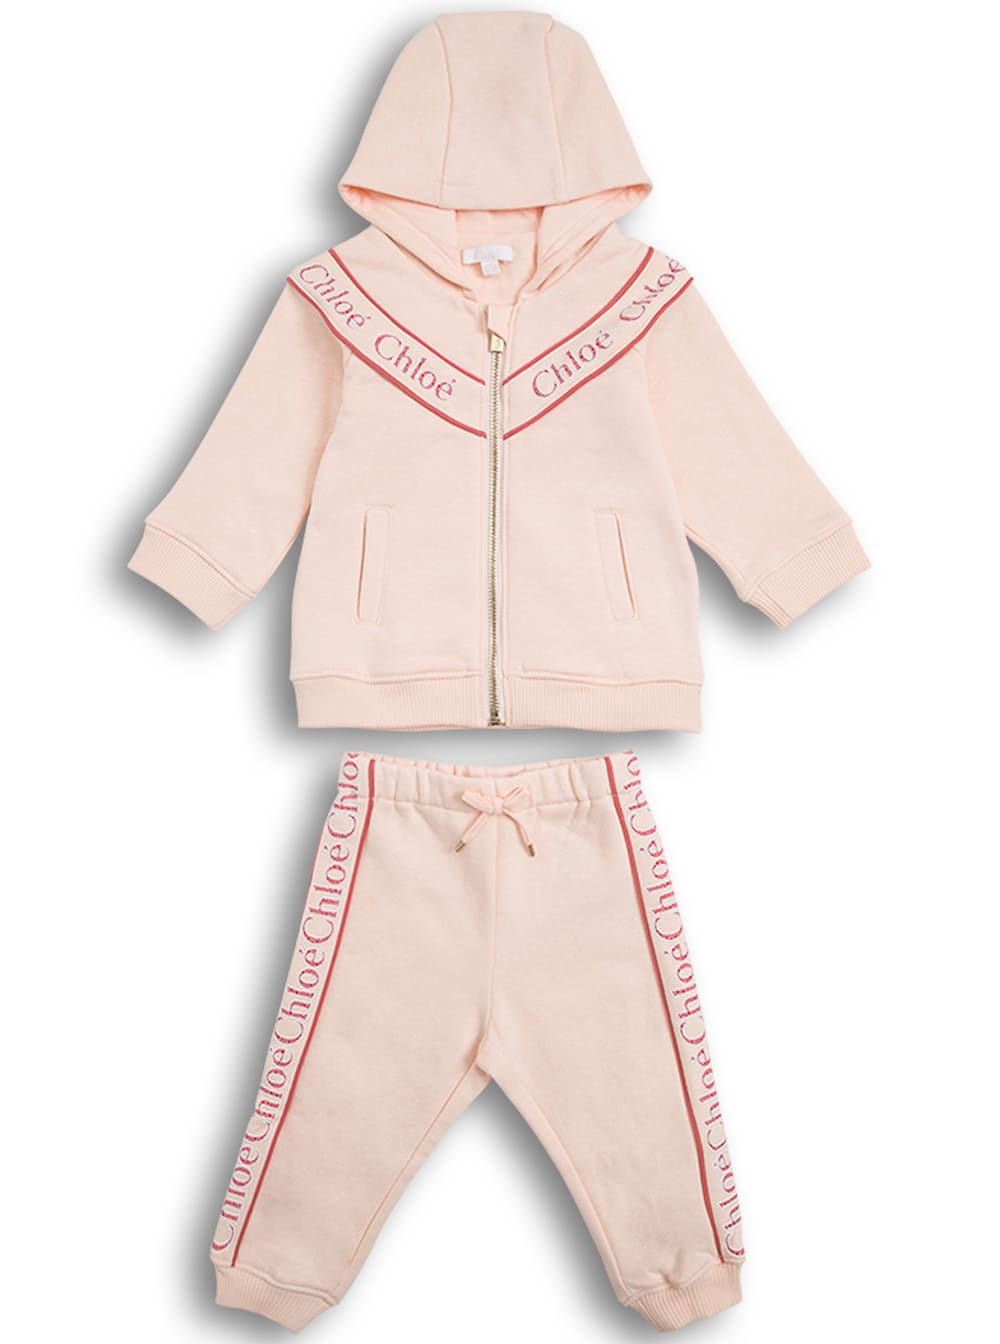 Chloé Coordinated Pink Cotton Suit With Logo